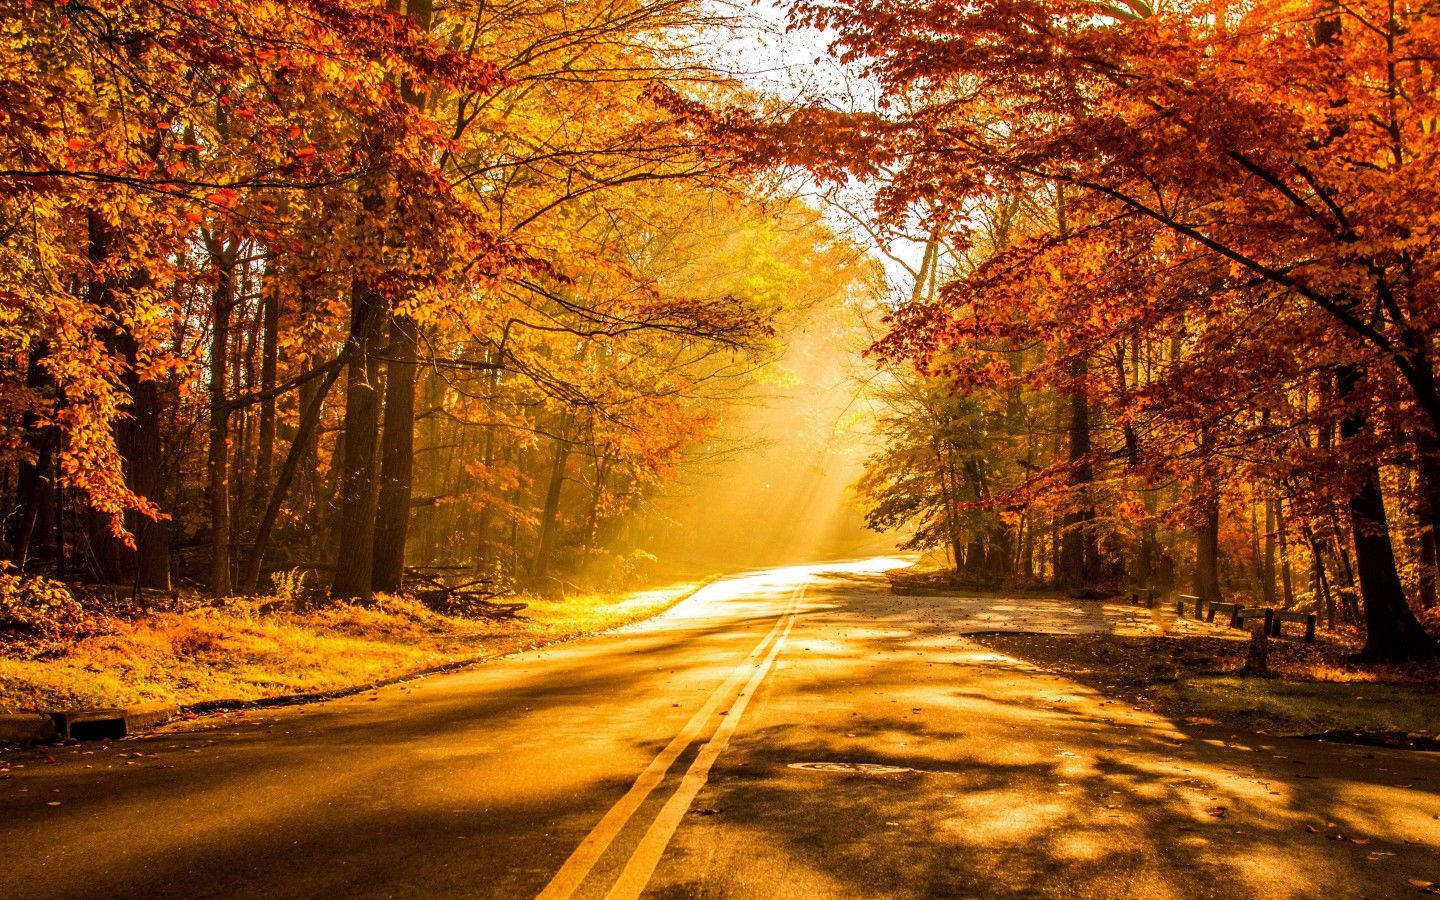 Road with bright reflection of sunlight and orange Hickories  trees during autumn season.